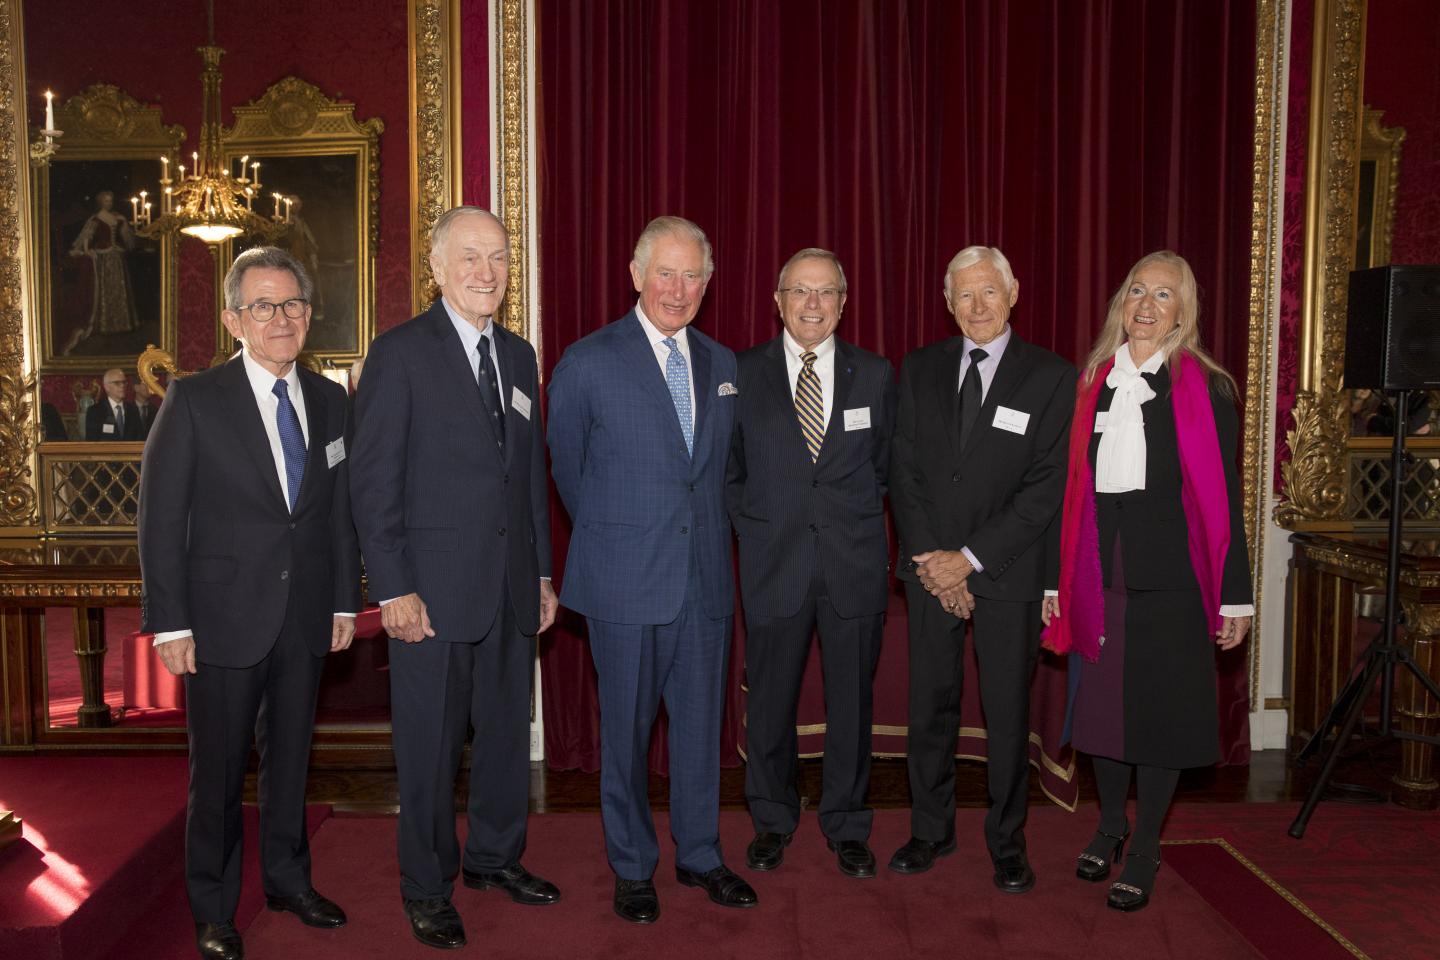 HRH The Prince of Wales with the Winners of the Queen Elizabeth Prize for Engineering